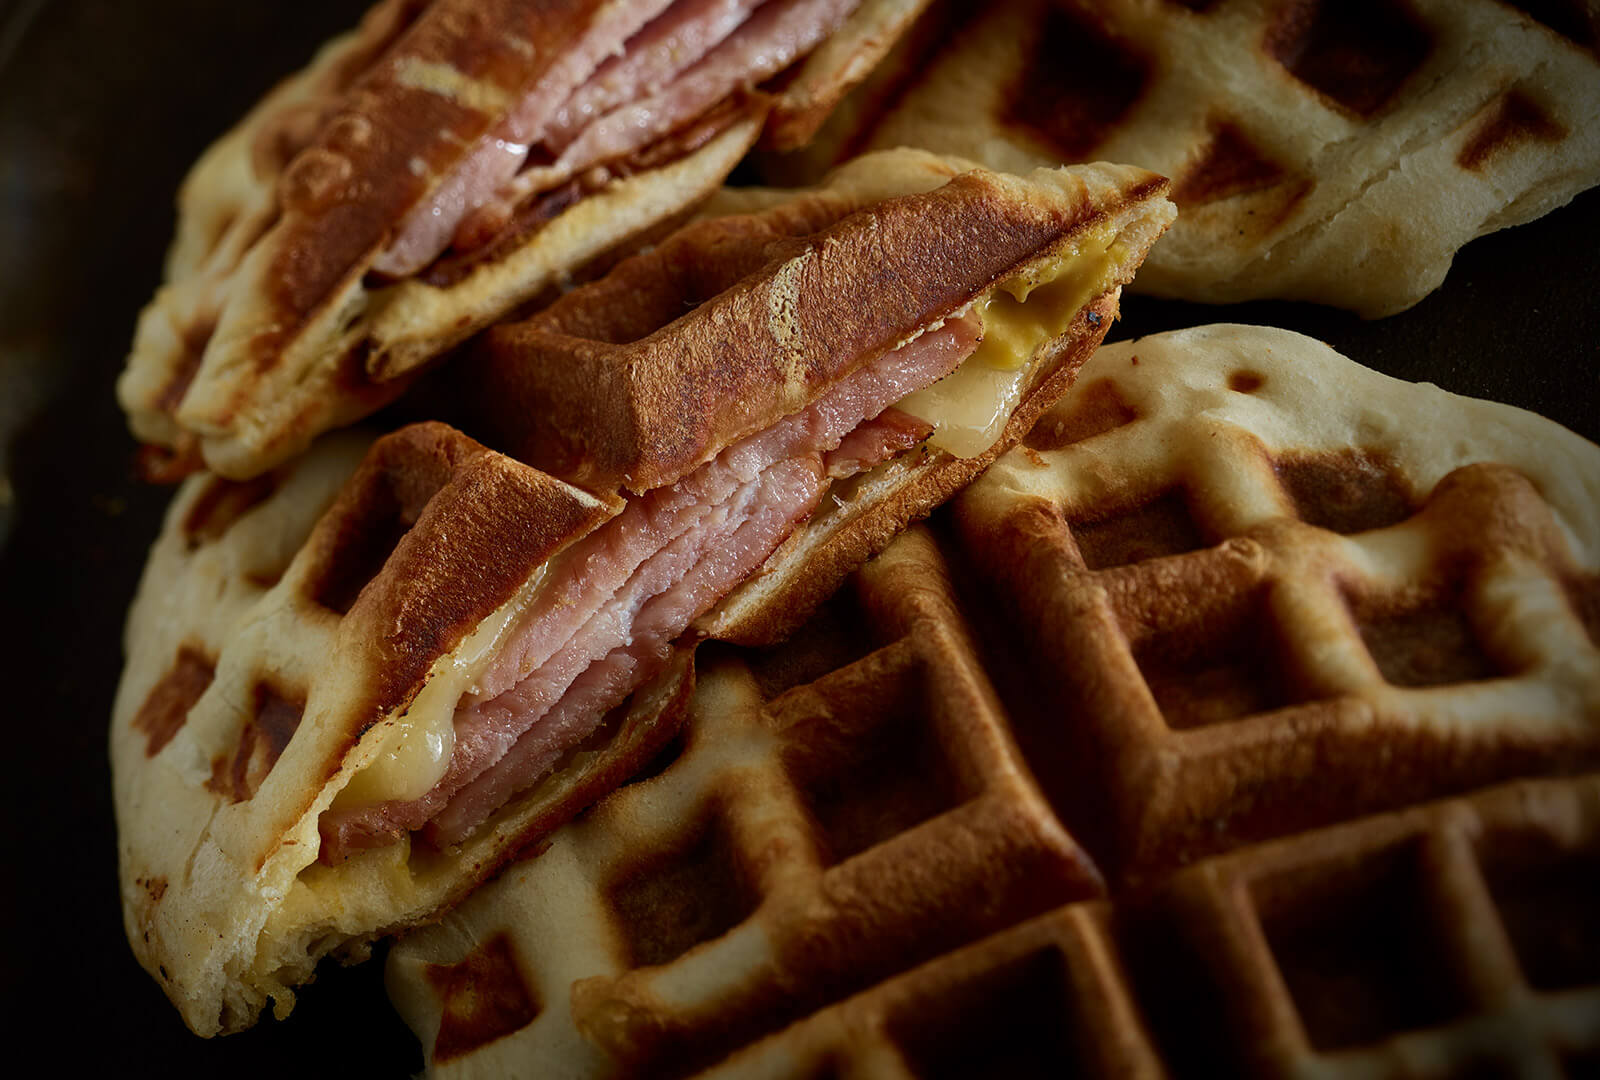 https://www.hormelfoods.com/wp-content/uploads/Inspired_hero_20210325_Canadian-Bacon-and-Cheese-Waffle-Sandwiches.jpg